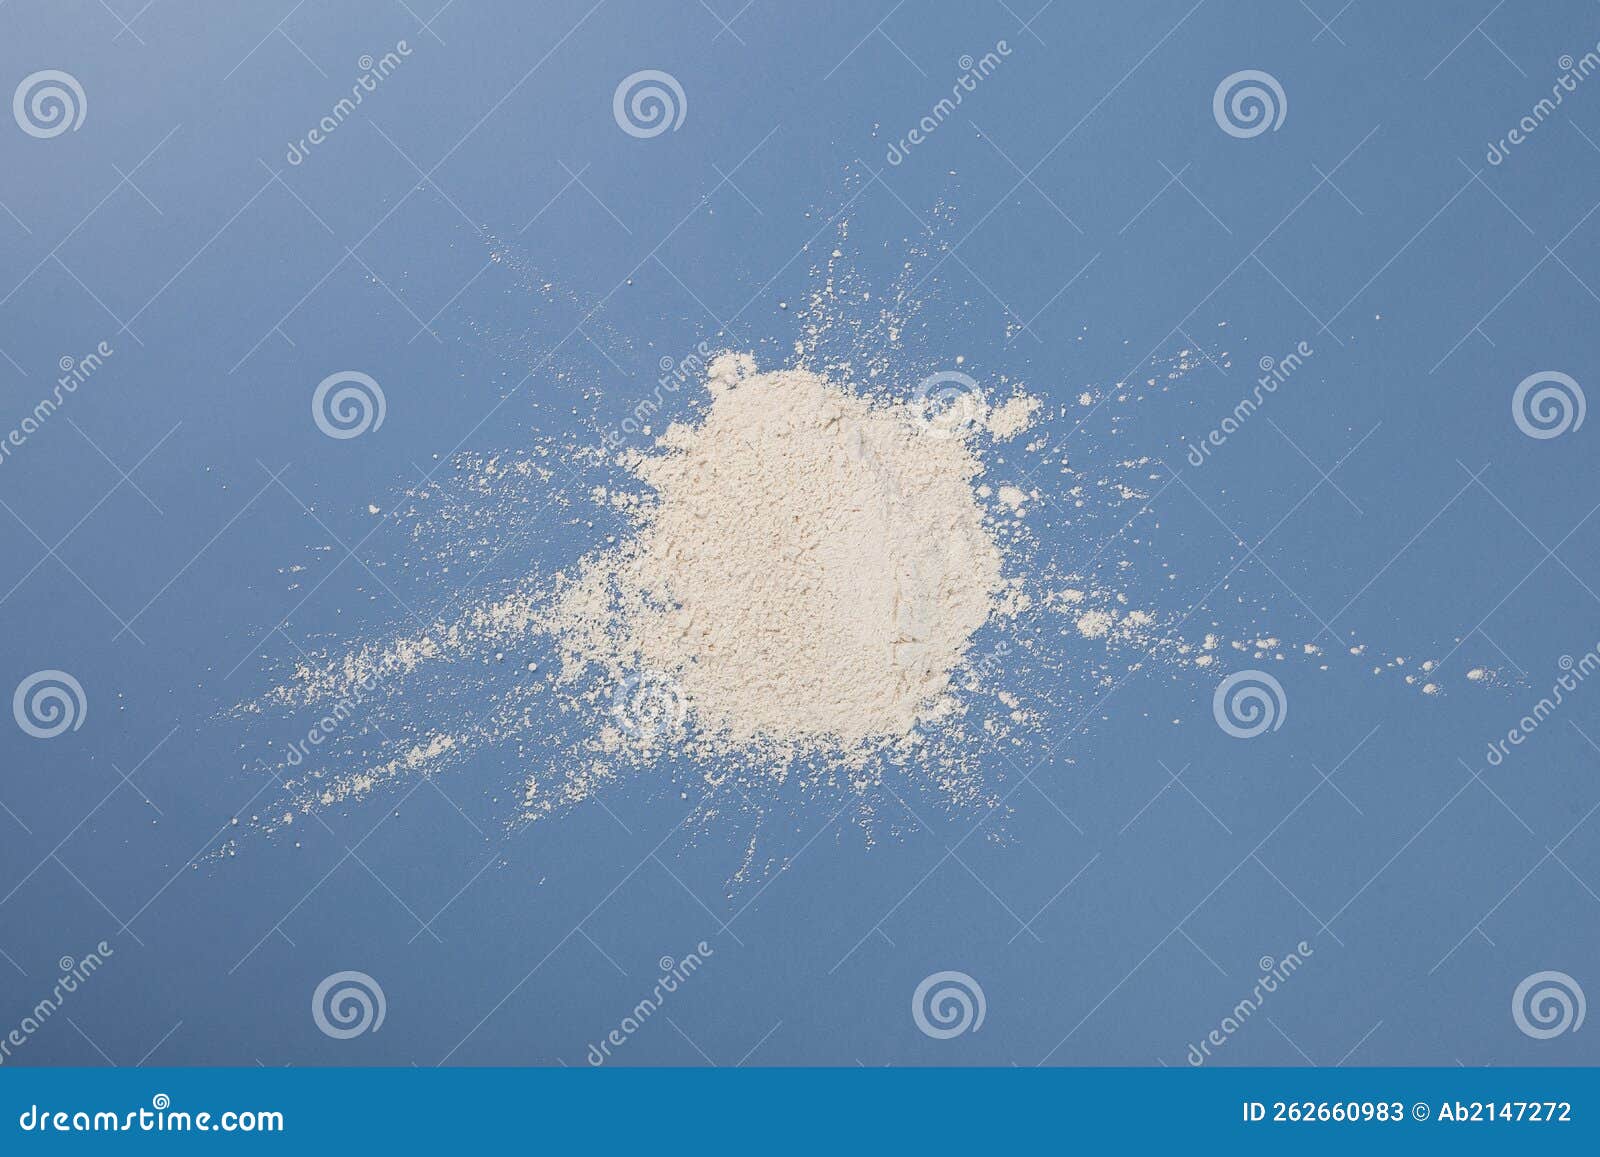 White Chemical Powder Scattered on Blue Surface. Pile of Titanium